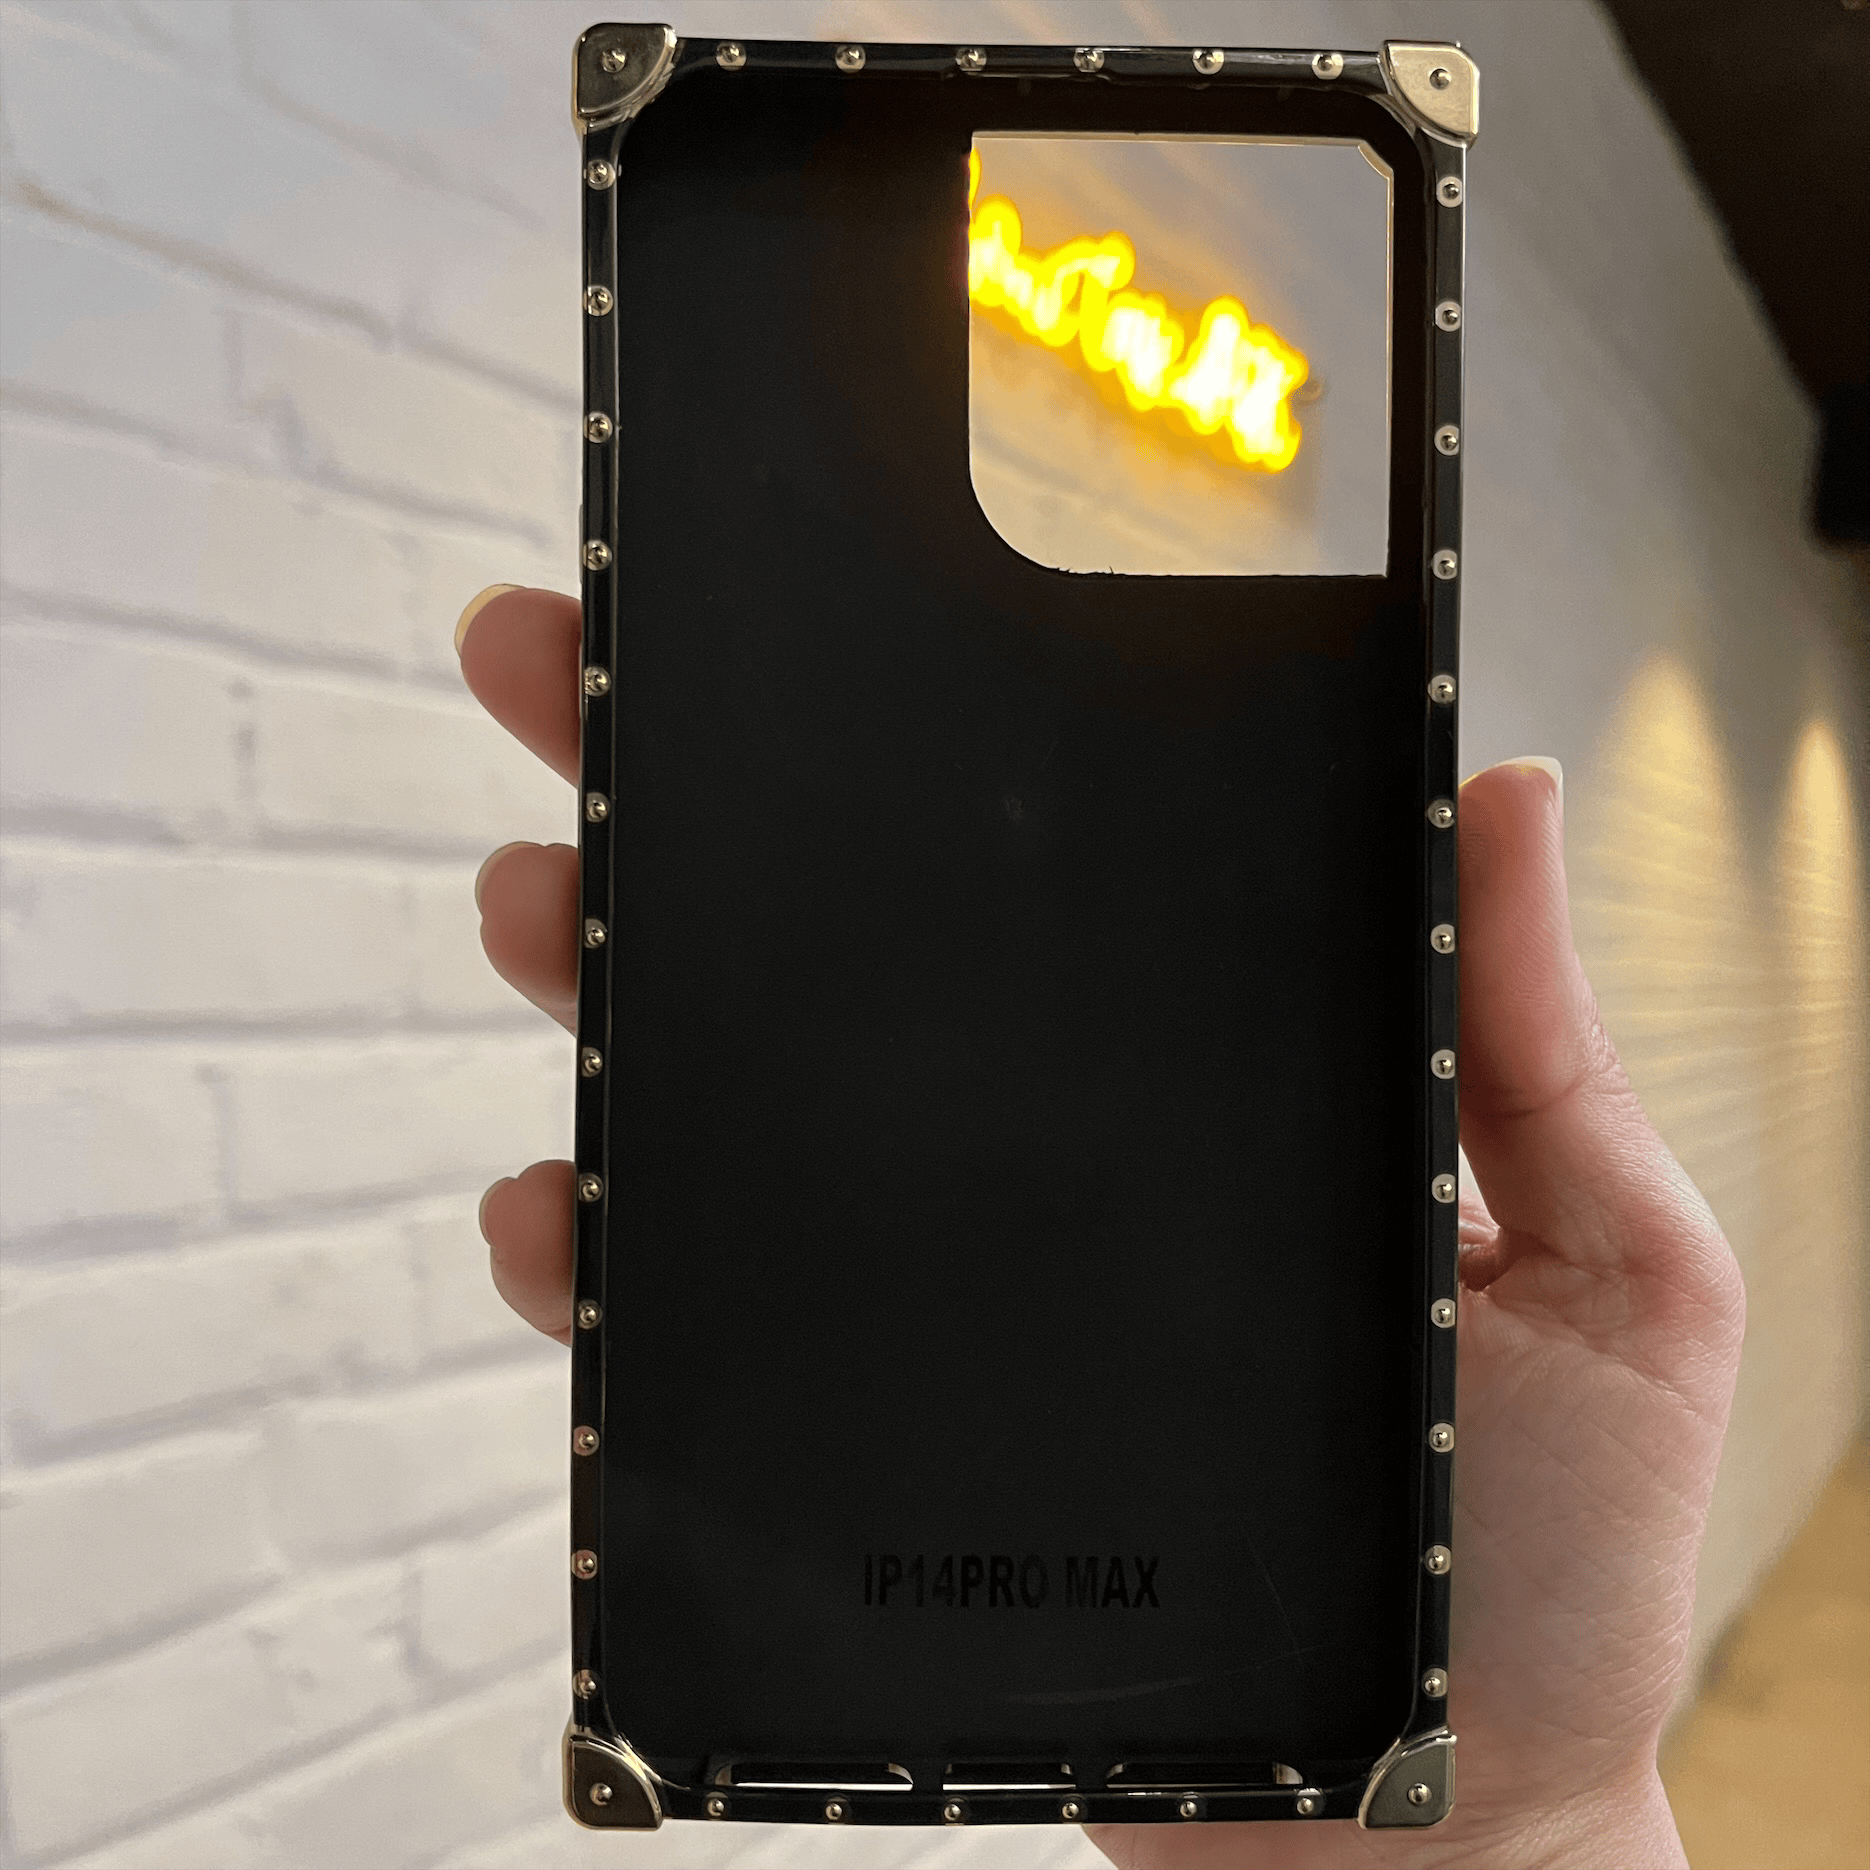 iPhone 11 Luxury Space Bear Case With Hidden Folding Stand Case